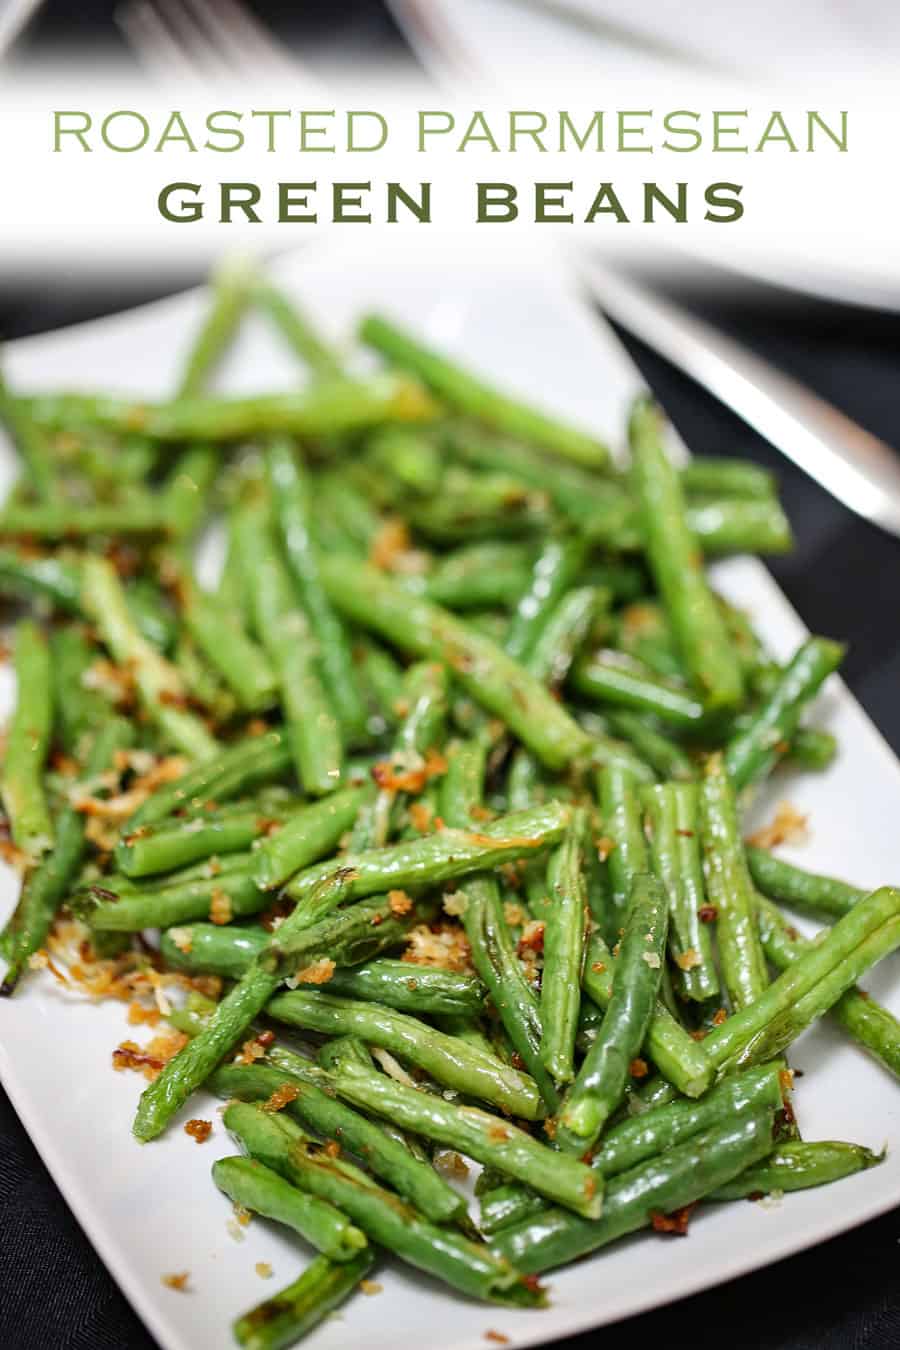 A plate of food, with Green beans